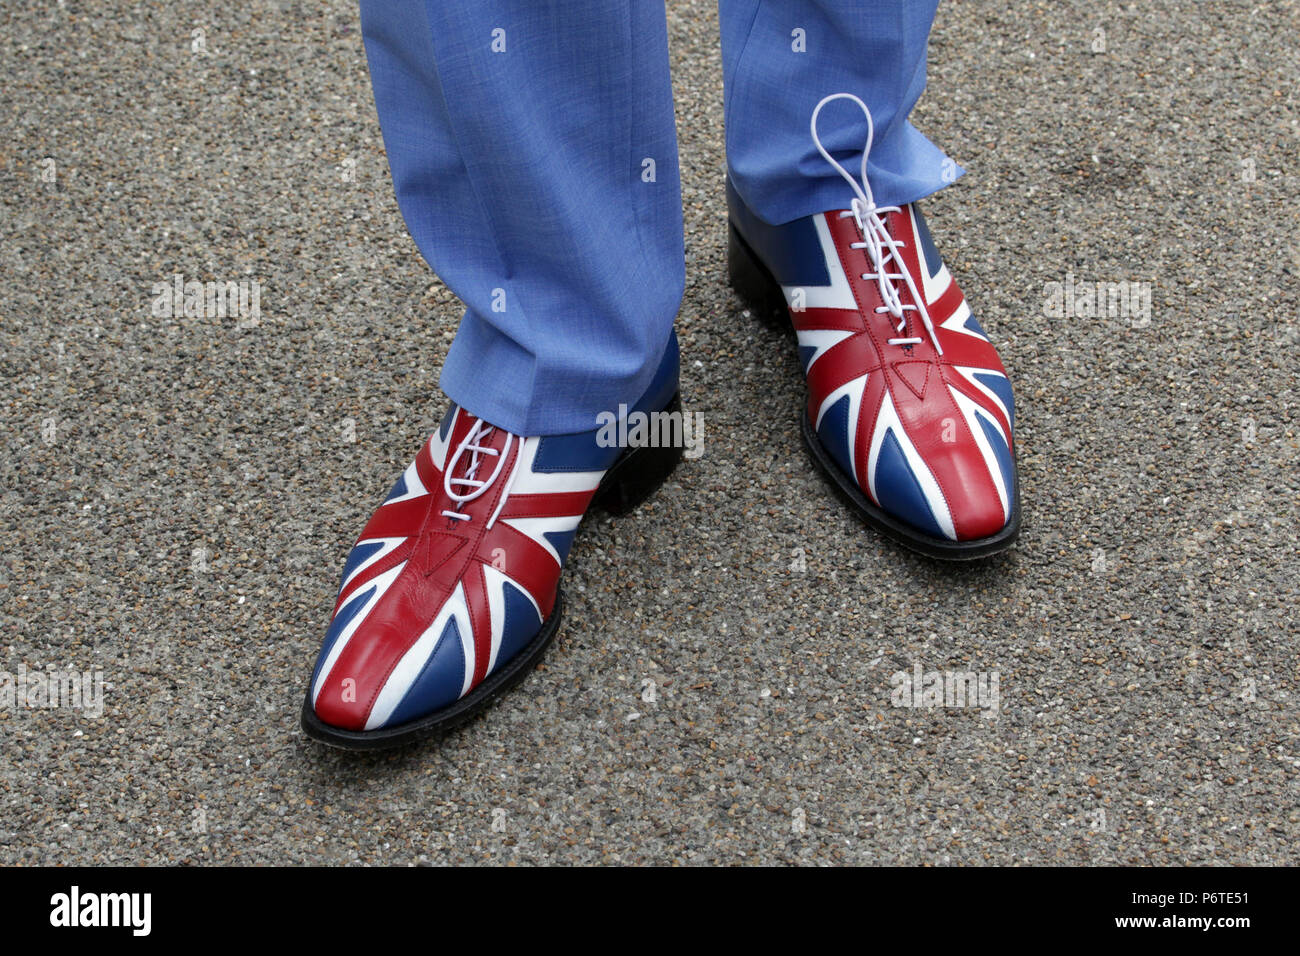 Royal Ascot, Fashion on Ladies Day, shoes in Union Jack colors Stock Photo